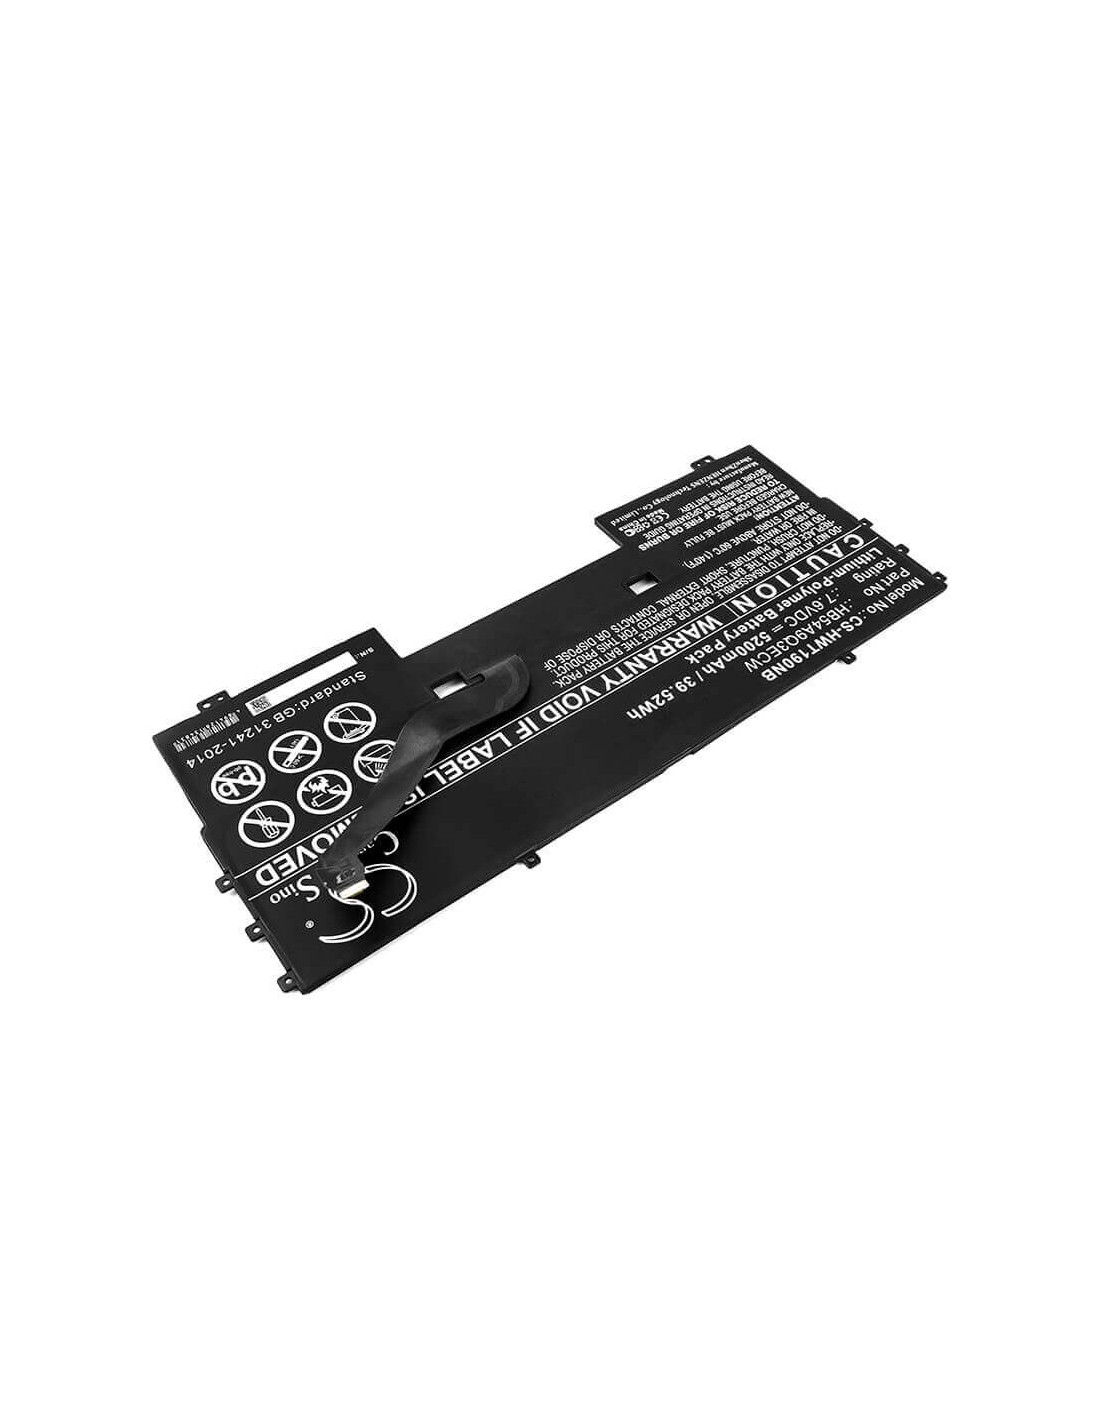 Battery for Huawei, Matebook X, Wt-w09, Wt-w19 7.6V, 5200mAh - 39.52Wh